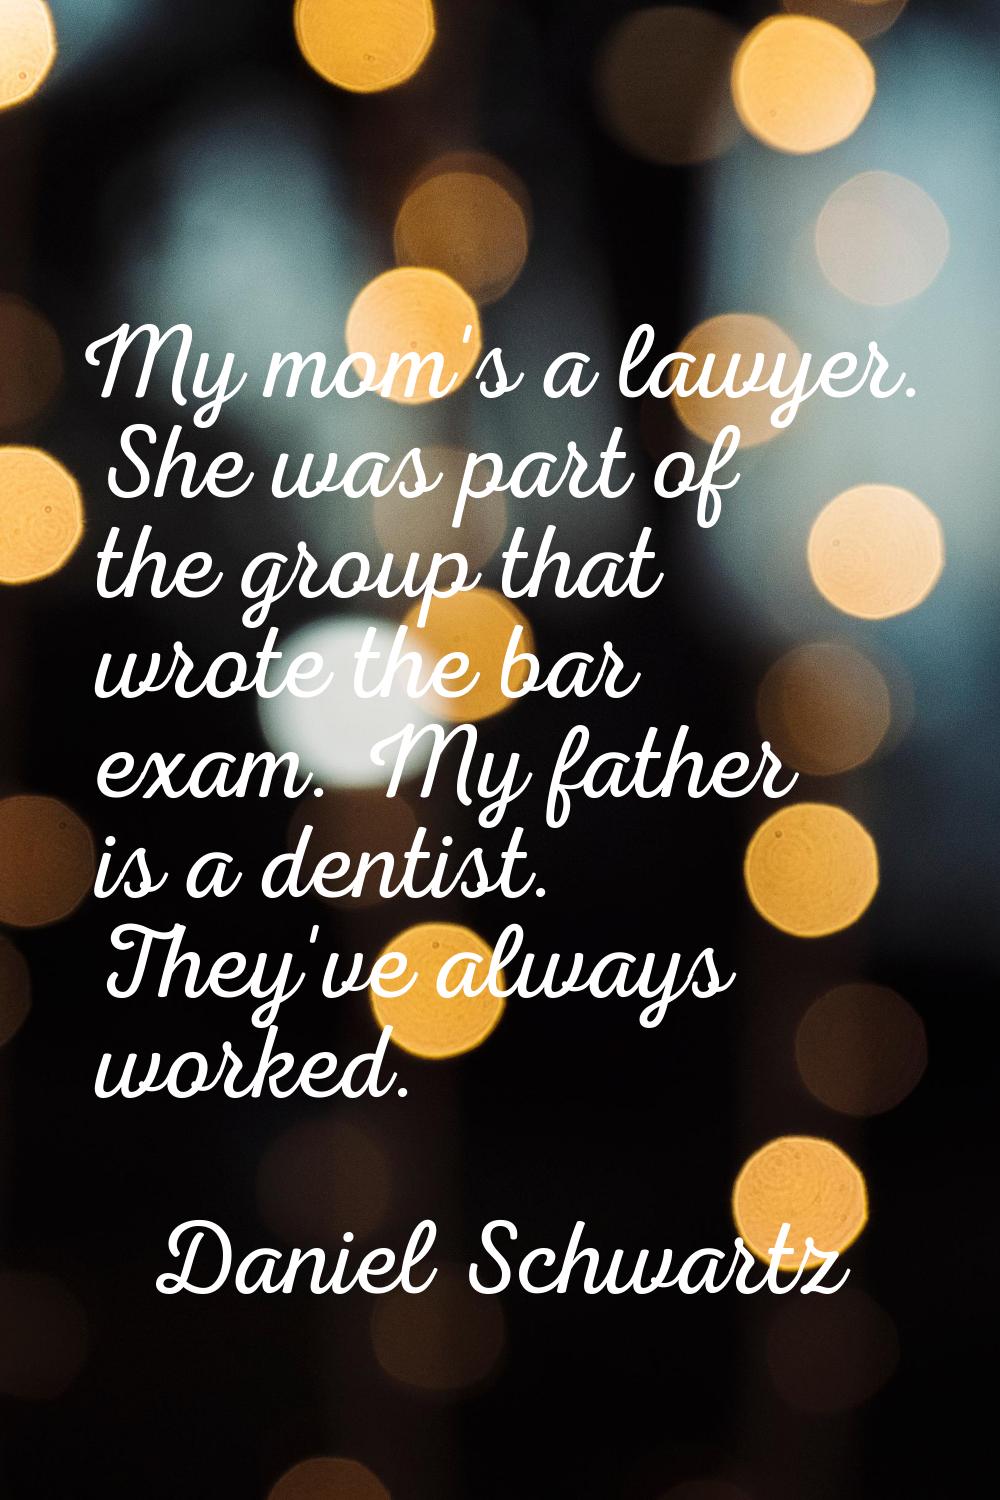 My mom's a lawyer. She was part of the group that wrote the bar exam. My father is a dentist. They'